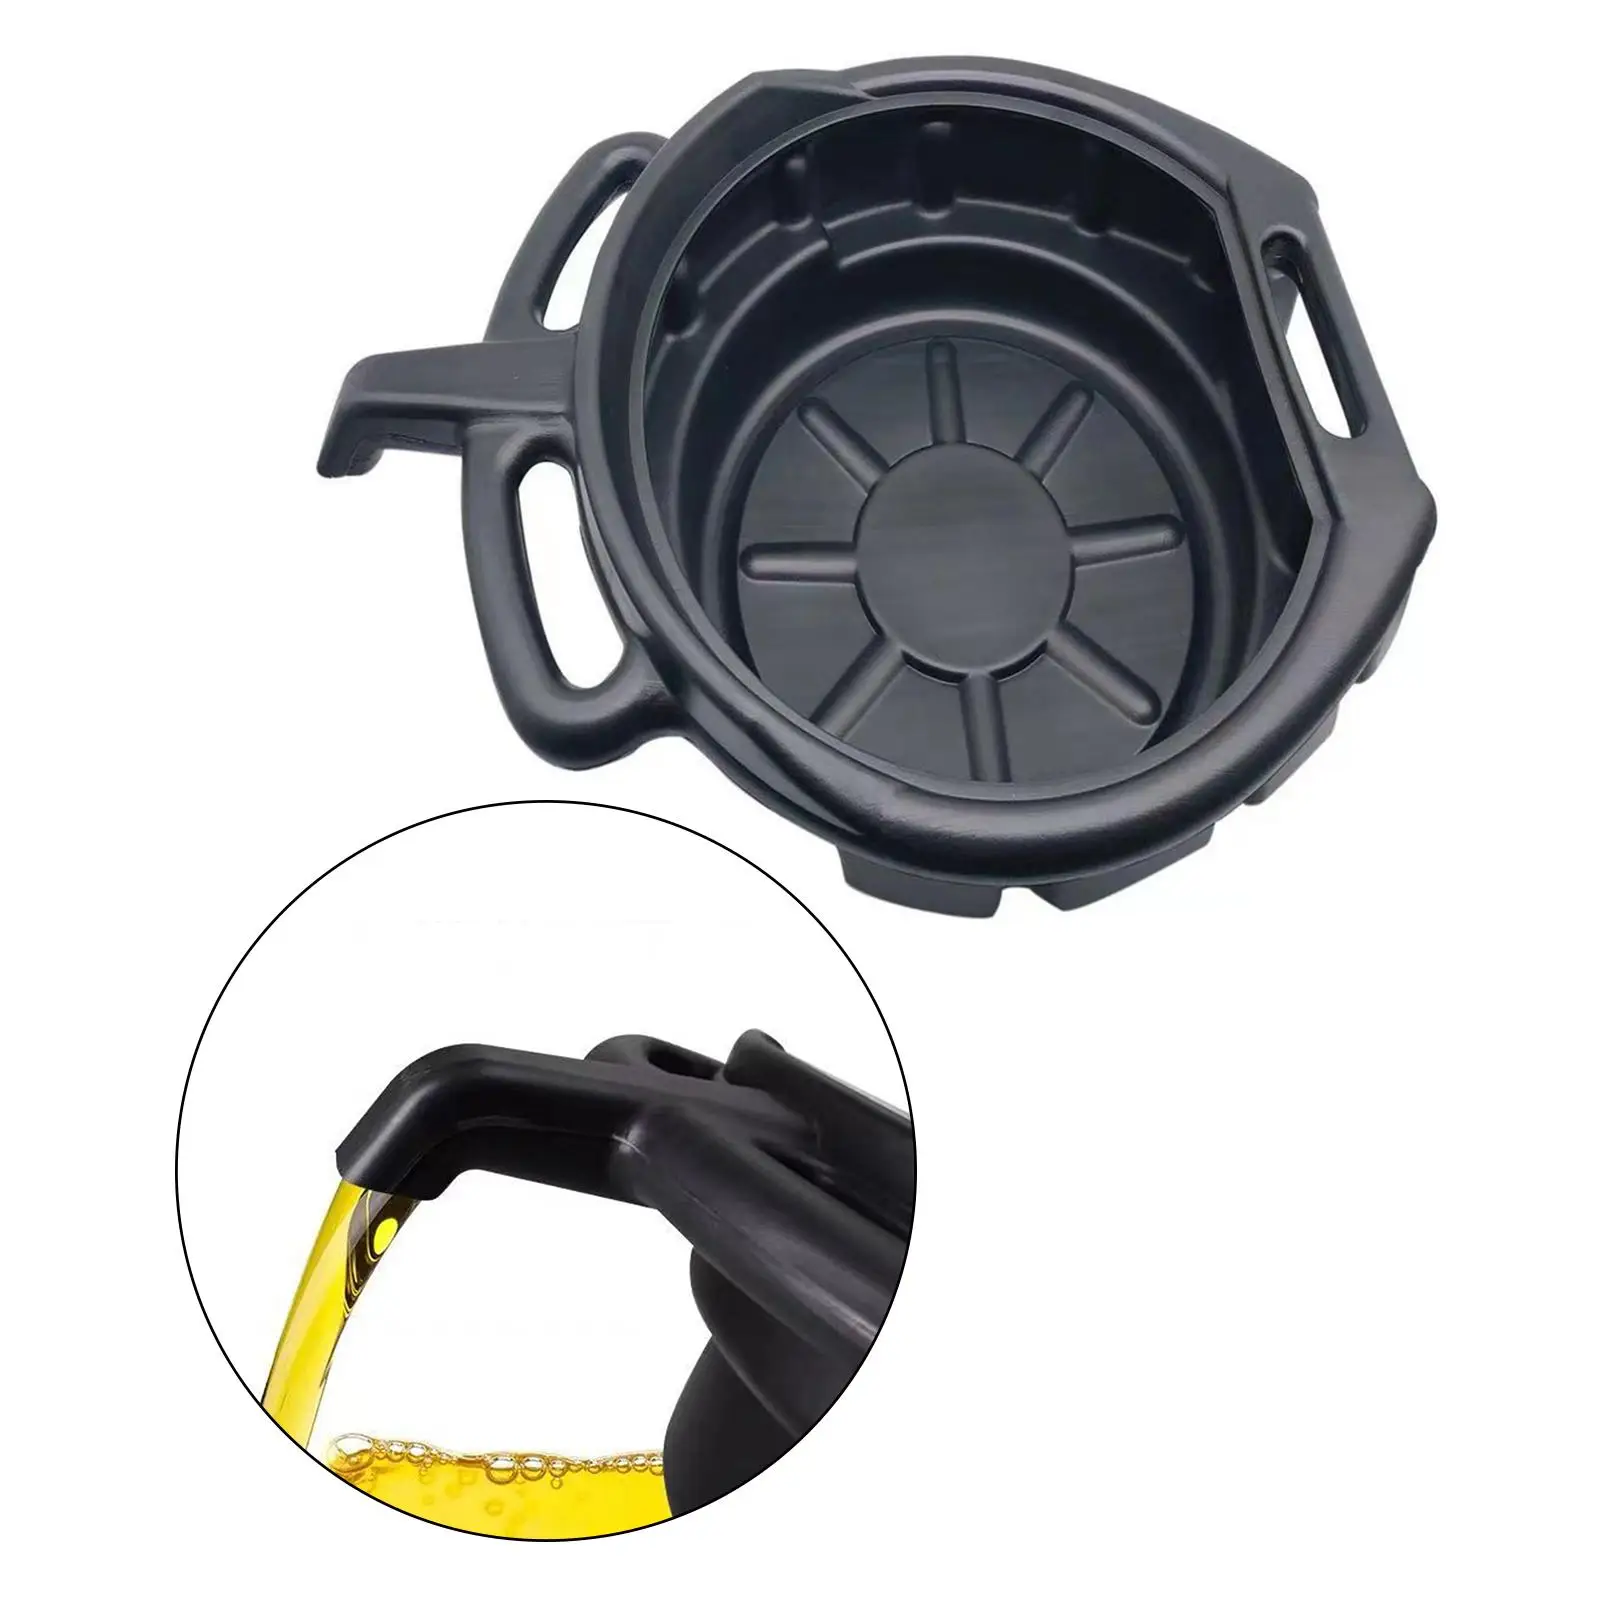 Oil Drain Container Can Multifunction 10L Oil Catches Can Reservoir Tank Oil Trip Tray for Workshop Car Vehicle Truck Boat